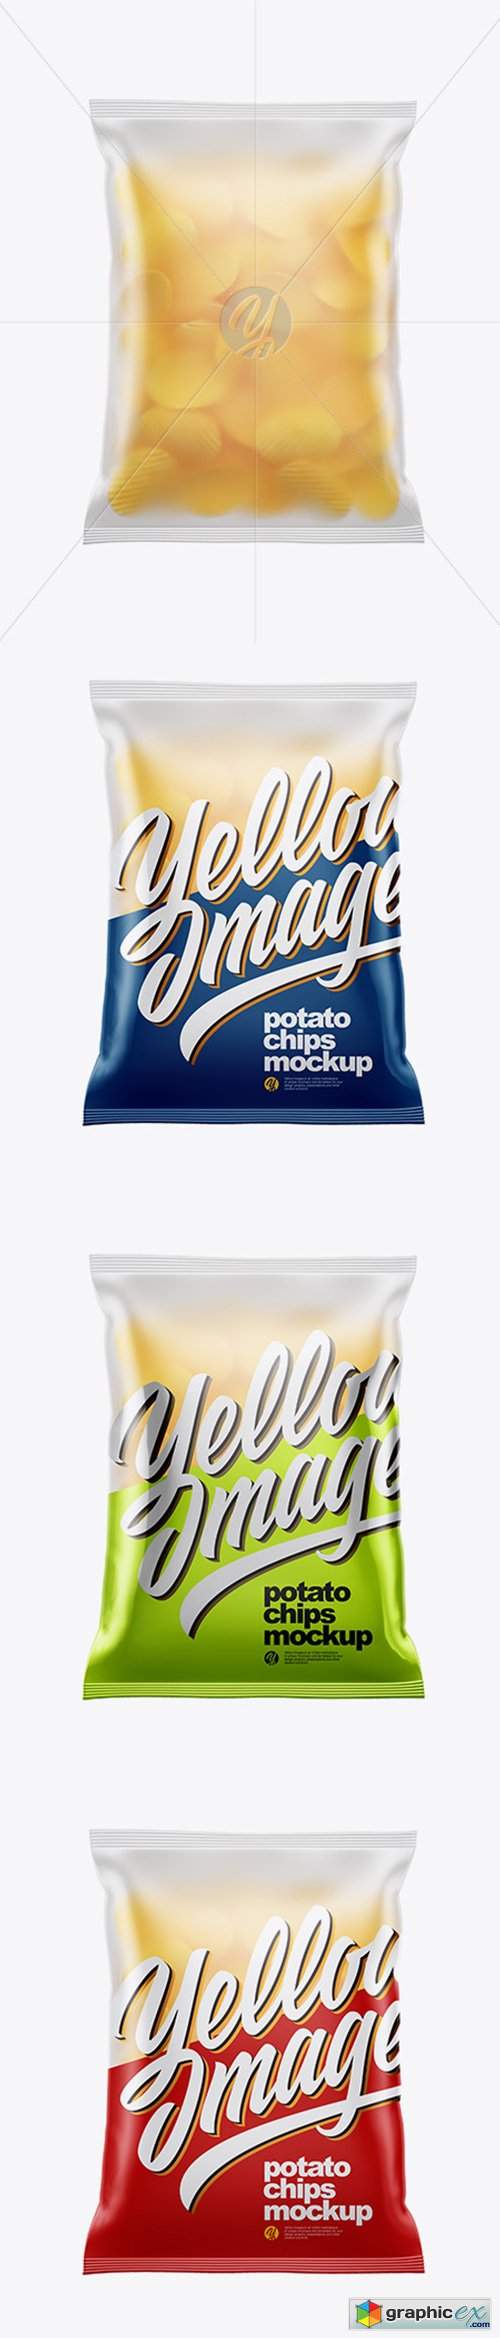 Frosted Bag With Corrugated Potato Chips Mockup